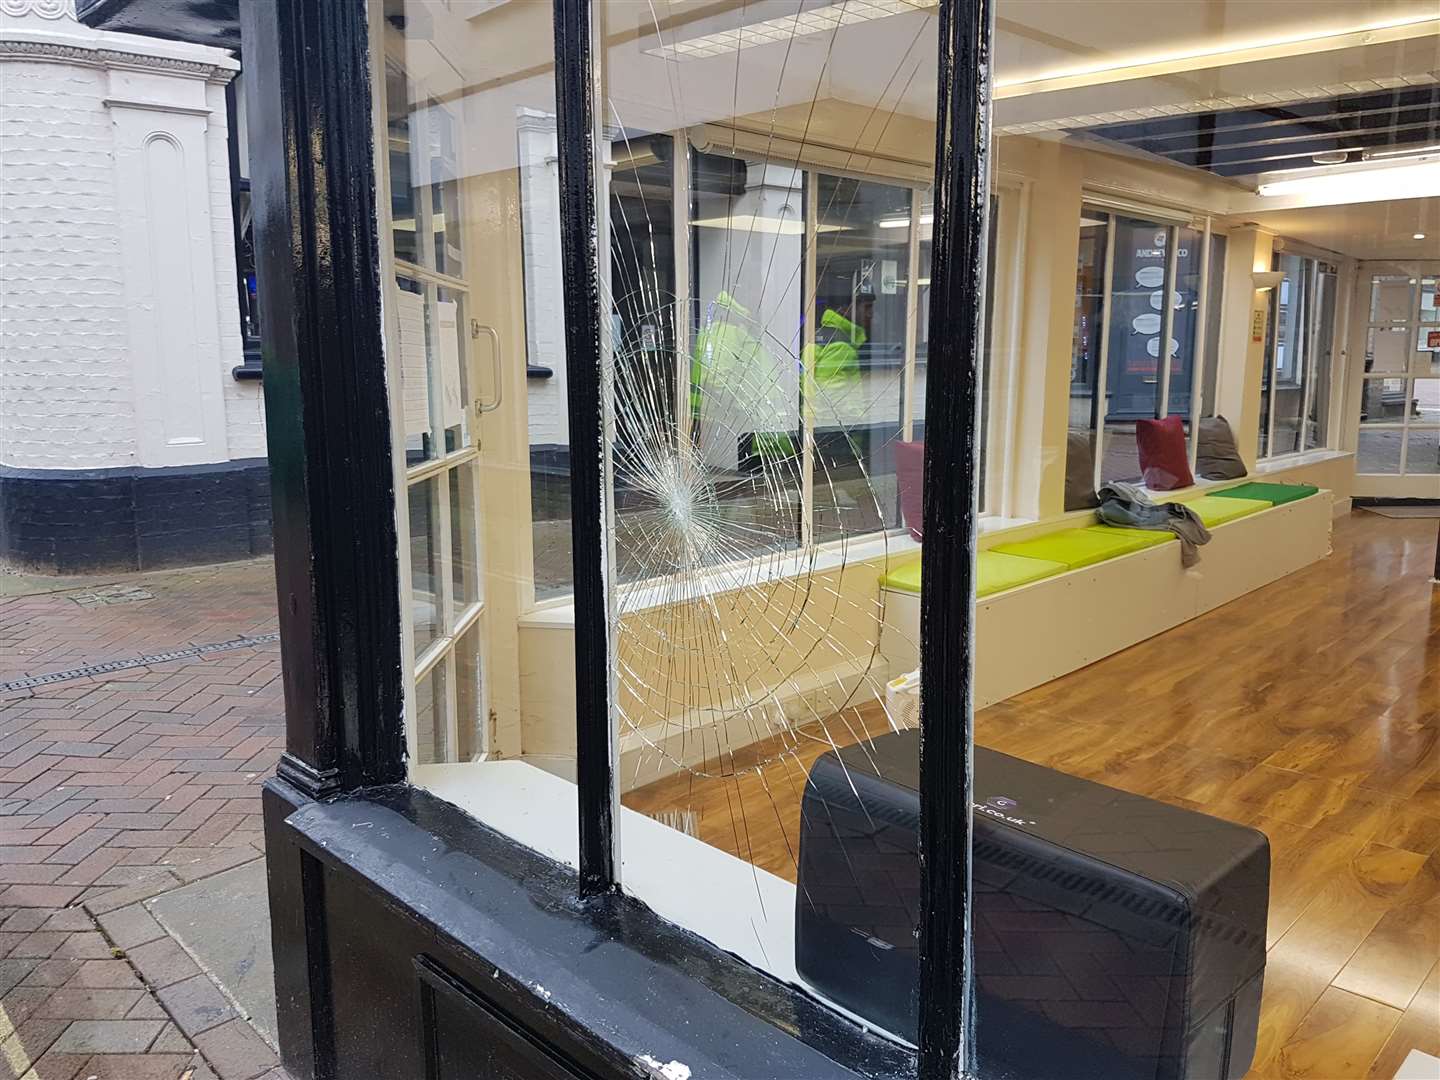 The window of HD Barber's was damaged during the incident